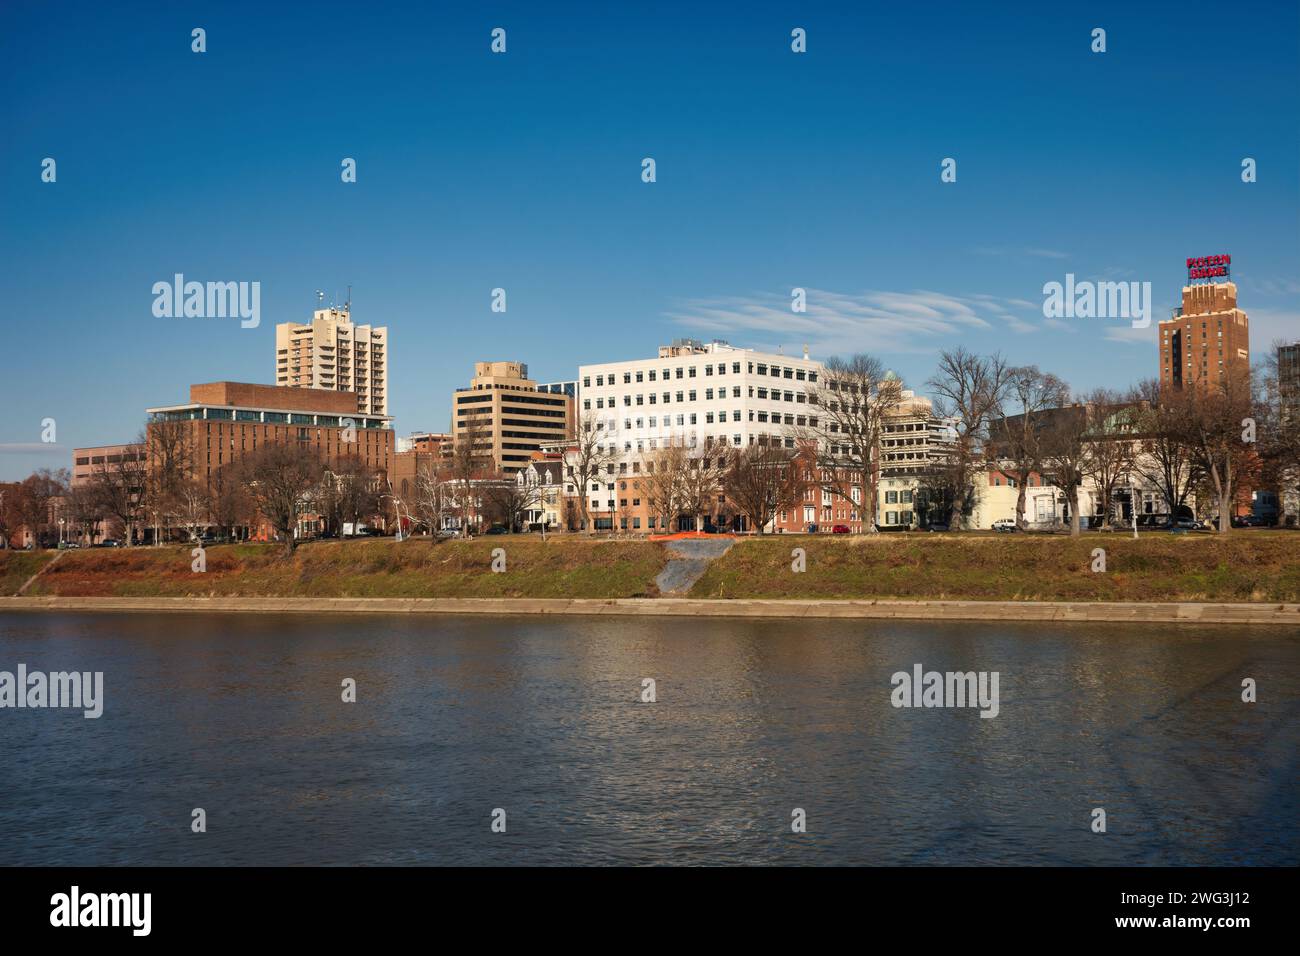 Cityscape of Harrisburg with the Susquehanna River in the foreground, Pennsylvania, USA. Stock Photo